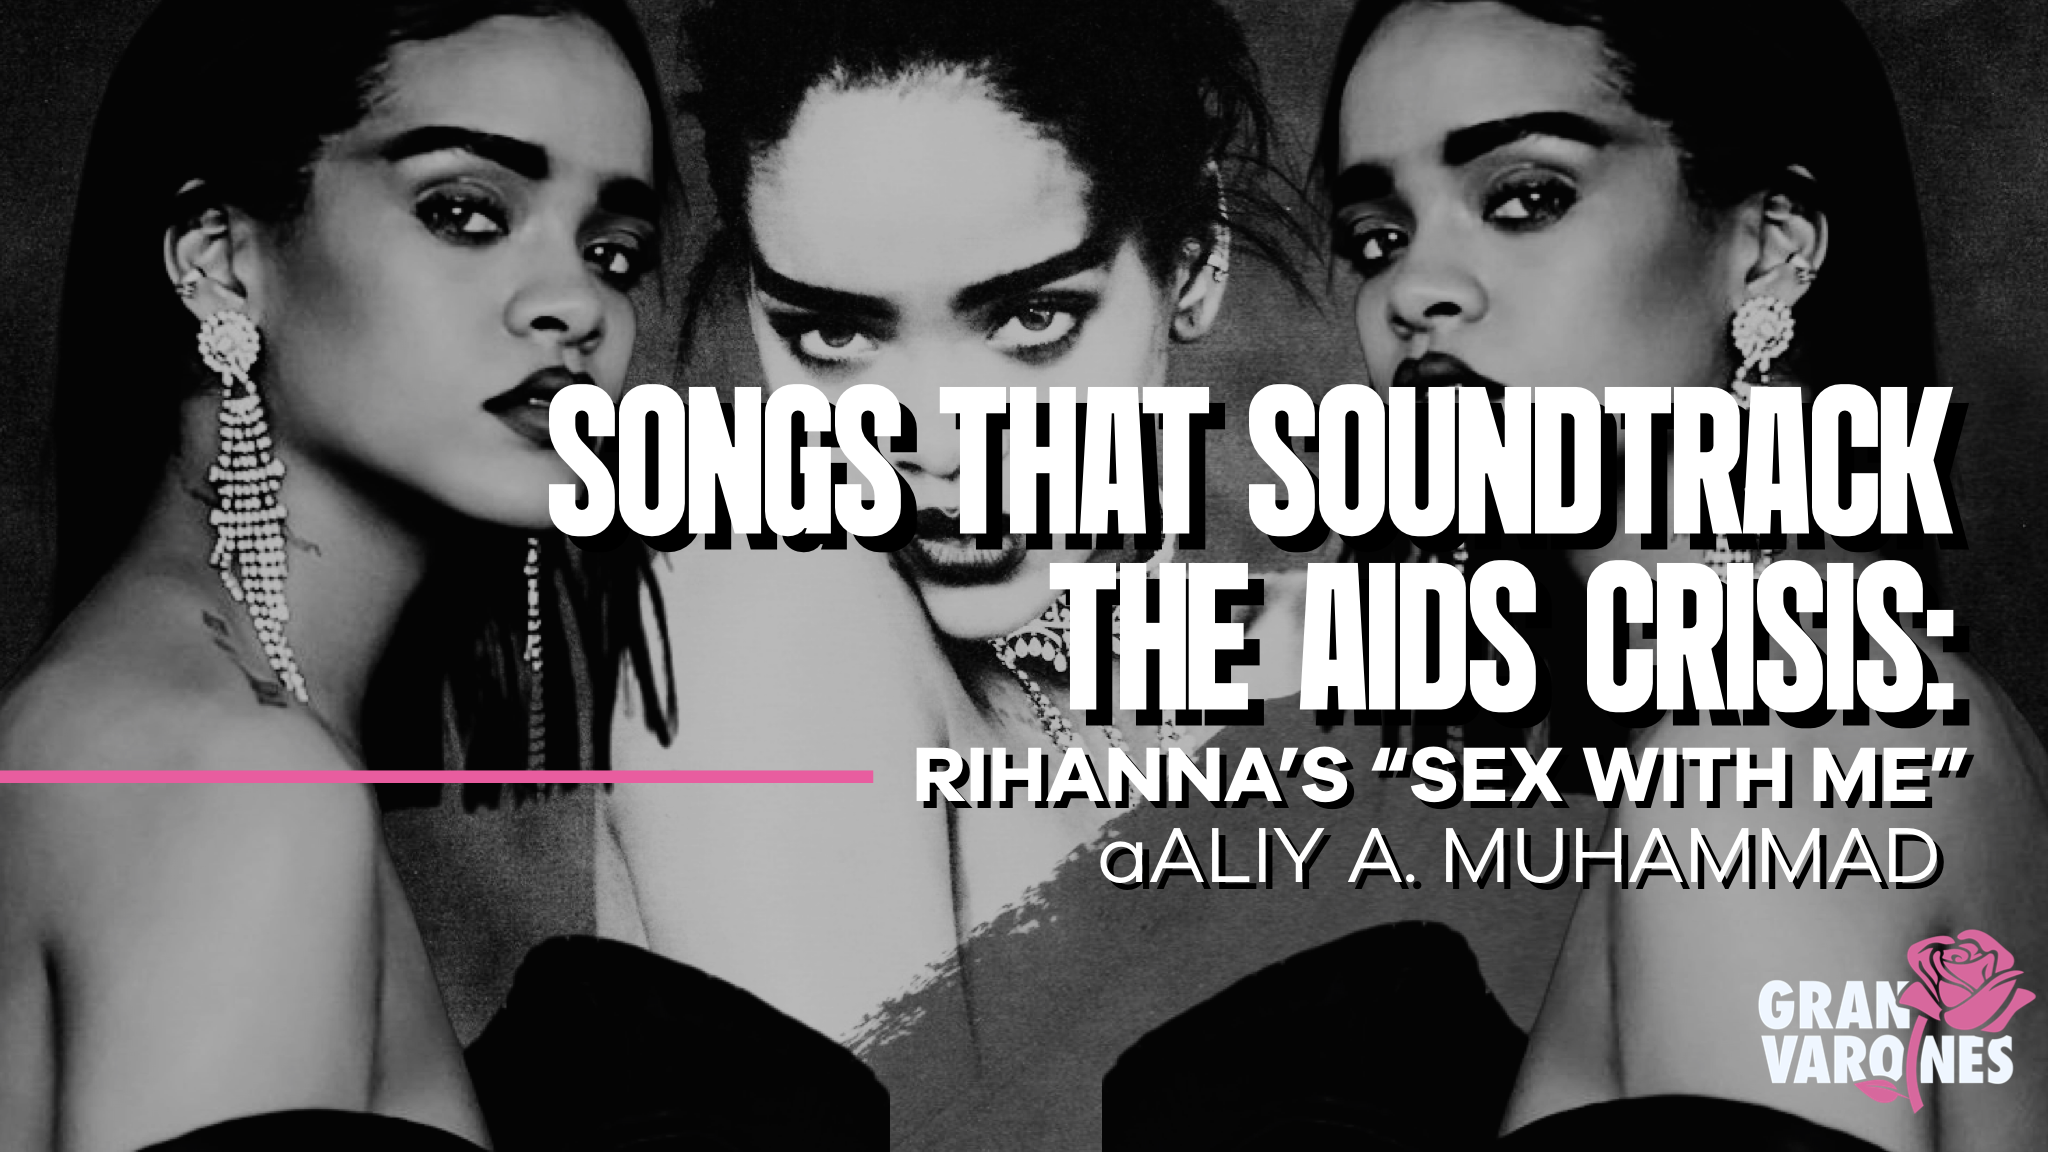 Songs That Soundtrack the AIDS Crisis: Rihanna’s “Sex With Me”